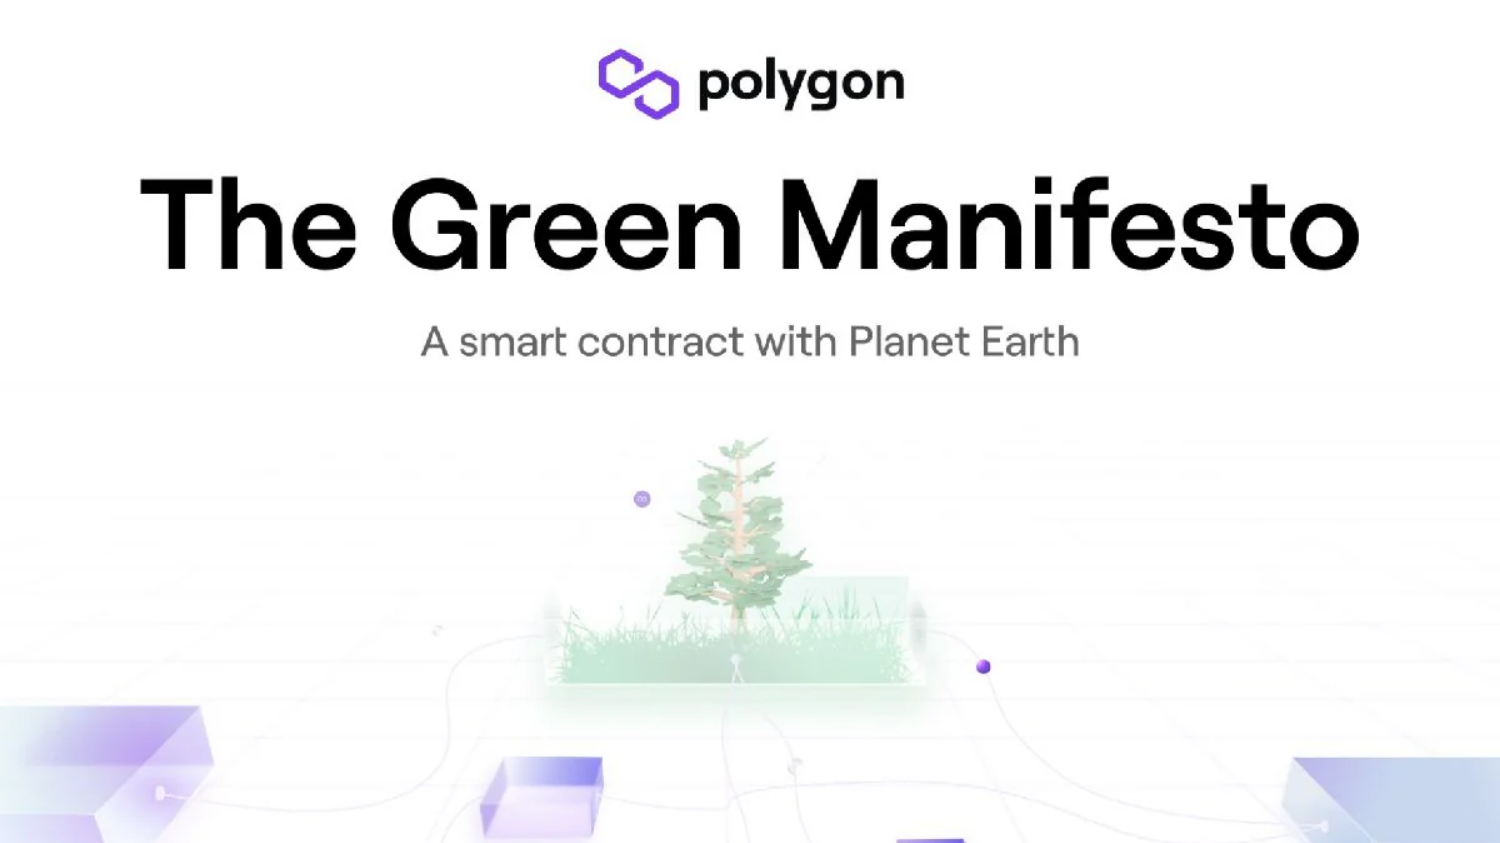 Polygon Commits $20 Million to Go Carbon Neutral in 2022